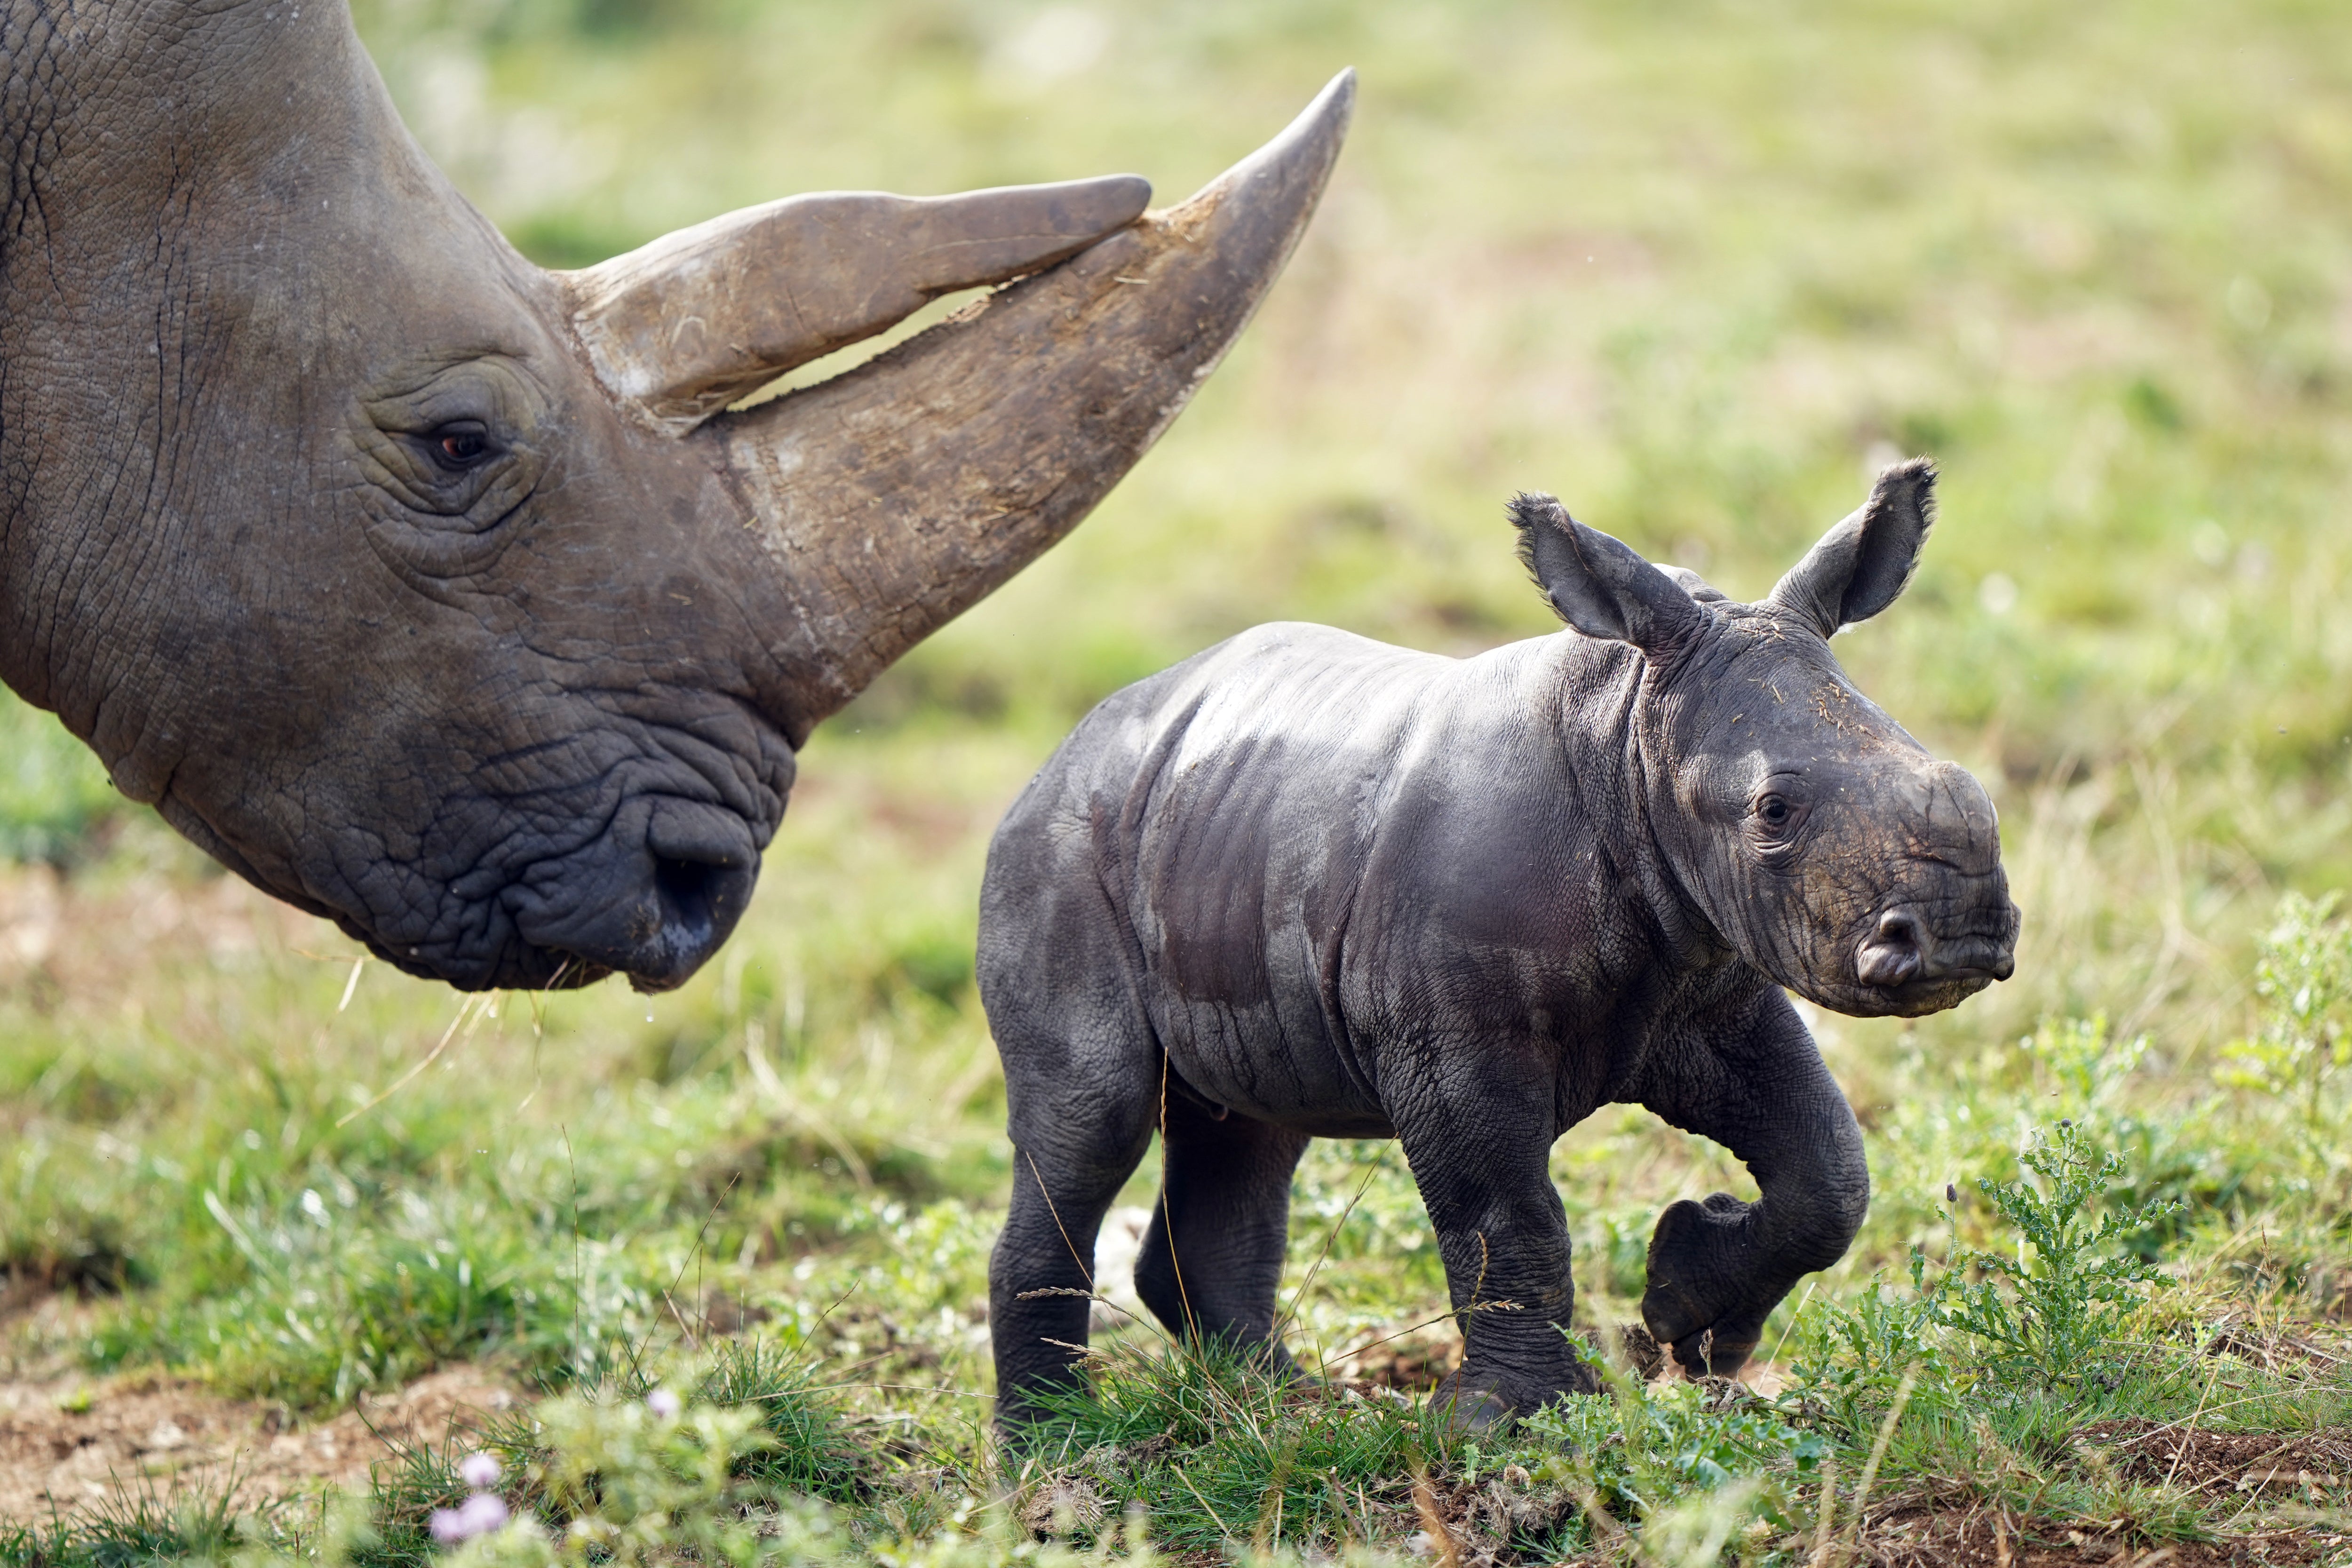 Two-week-old Southern white rhino calf Nandi explores her enclosure for the first time with mother Tuli at ZSL Whipsnade Zoo (Joe Giddens/PA)